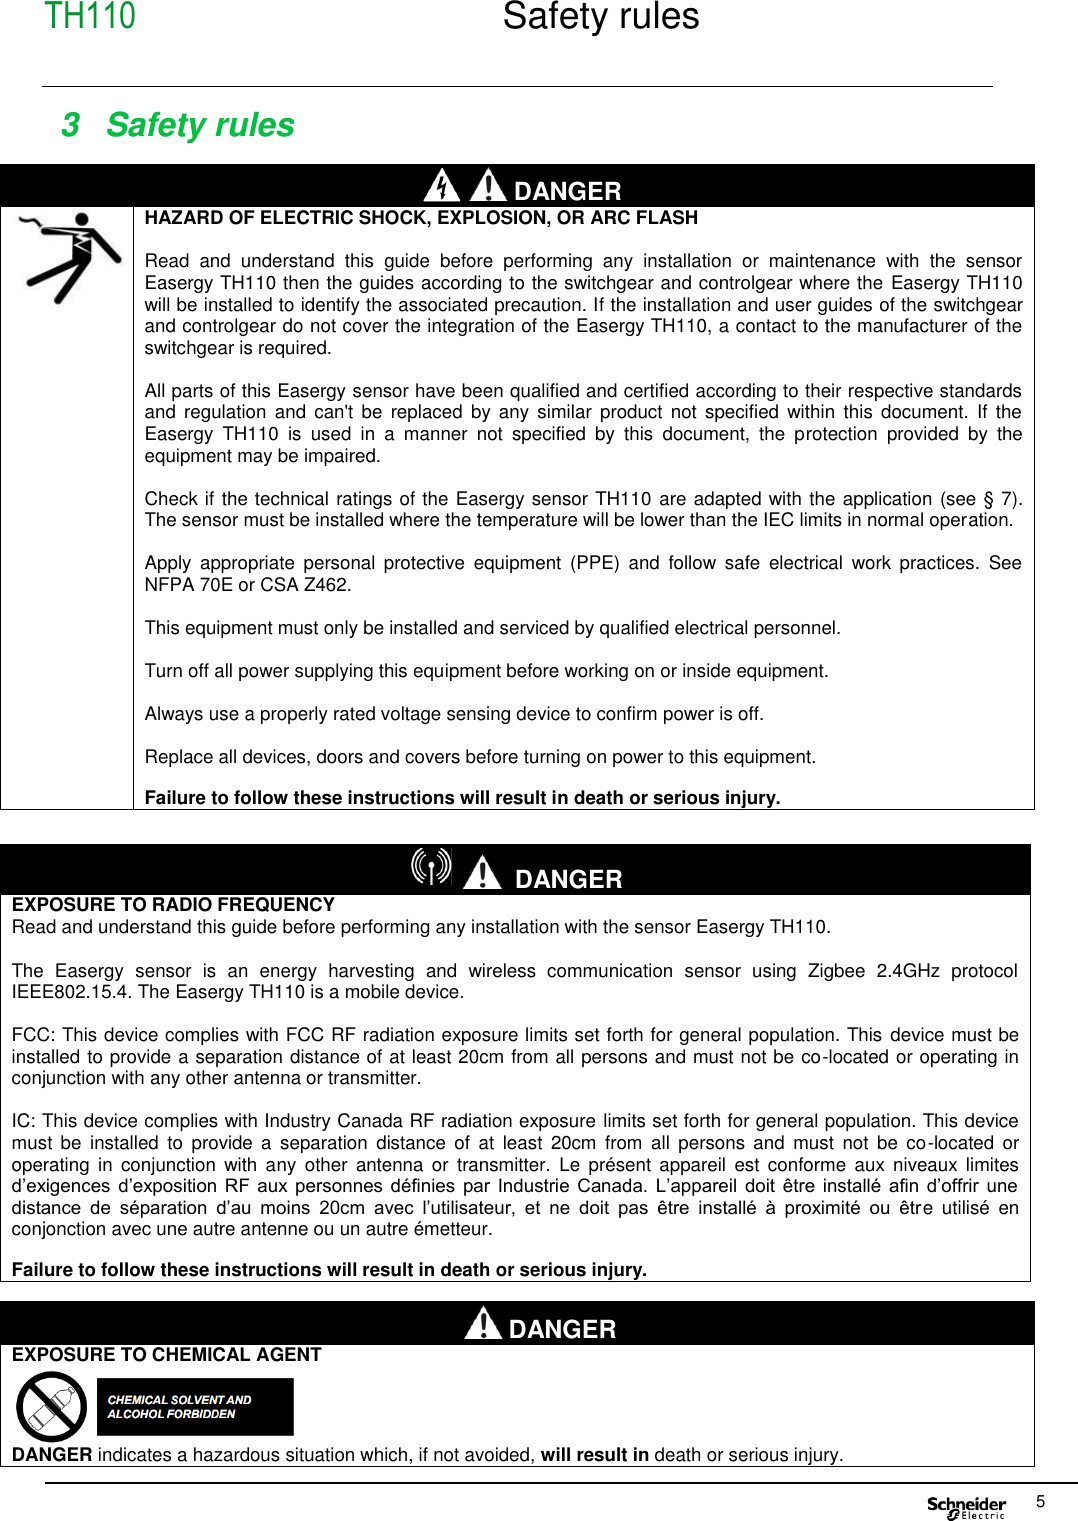 TH110  Safety rules     5  3  Safety rules    DANGER  HAZARD OF ELECTRIC SHOCK, EXPLOSION, OR ARC FLASH    Read  and  understand  this  guide  before  performing  any  installation  or  maintenance  with  the  sensor Easergy TH110 then the guides according to the switchgear and controlgear where the  Easergy TH110 will be installed to identify the associated precaution. If the installation and user guides of the switchgear and controlgear do not cover the integration of the Easergy TH110, a contact to the manufacturer of the switchgear is required.  All parts of this Easergy sensor have been qualified and certified according to their respective standards and  regulation  and can&apos;t be  replaced  by  any  similar product not  specified  within  this  document.  If  the Easergy  TH110  is  used  in  a  manner  not  specified  by  this  document,  the  protection  provided  by  the equipment may be impaired.  Check if the technical ratings of the Easergy sensor TH110  are adapted with the application (see § 7). The sensor must be installed where the temperature will be lower than the IEC limits in normal operation.  Apply  appropriate  personal  protective  equipment  (PPE)  and  follow  safe  electrical  work  practices.  See NFPA 70E or CSA Z462.  This equipment must only be installed and serviced by qualified electrical personnel.  Turn off all power supplying this equipment before working on or inside equipment.  Always use a properly rated voltage sensing device to confirm power is off.  Replace all devices, doors and covers before turning on power to this equipment.  Failure to follow these instructions will result in death or serious injury.    DANGER EXPOSURE TO CHEMICAL AGENT  DANGER indicates a hazardous situation which, if not avoided, will result in death or serious injury.  DANGER EXPOSURE TO RADIO FREQUENCY Read and understand this guide before performing any installation with the sensor Easergy TH110.  The  Easergy  sensor  is  an  energy  harvesting  and  wireless  communication  sensor  using  Zigbee  2.4GHz  protocol IEEE802.15.4. The Easergy TH110 is a mobile device.  FCC: This device complies with FCC RF radiation exposure limits set forth for general population. This device must be installed to provide a separation distance of at least 20cm from all persons and must not be co-located or operating in conjunction with any other antenna or transmitter.  IC: This device complies with Industry Canada RF radiation exposure limits set forth for general population. This device must  be  installed  to  provide  a  separation  distance  of  at  least  20cm  from  all persons  and  must  not  be co-located  or operating  in  conjunction  with  any  other  antenna  or  transmitter.  Le  présent  appareil  est  conforme aux niveaux  limites d’exigences  d’exposition  RF  aux personnes  définies  par  Industrie  Canada.  L’appareil  doit  être installé  afin  d’offrir  une distance  de  séparation  d’au  moins  20cm  avec  l’utilisateur,  et  ne  doit  pas  être  installé  à  proximité  ou  être  utilisé  en conjonction avec une autre antenne ou un autre émetteur.  Failure to follow these instructions will result in death or serious injury. 